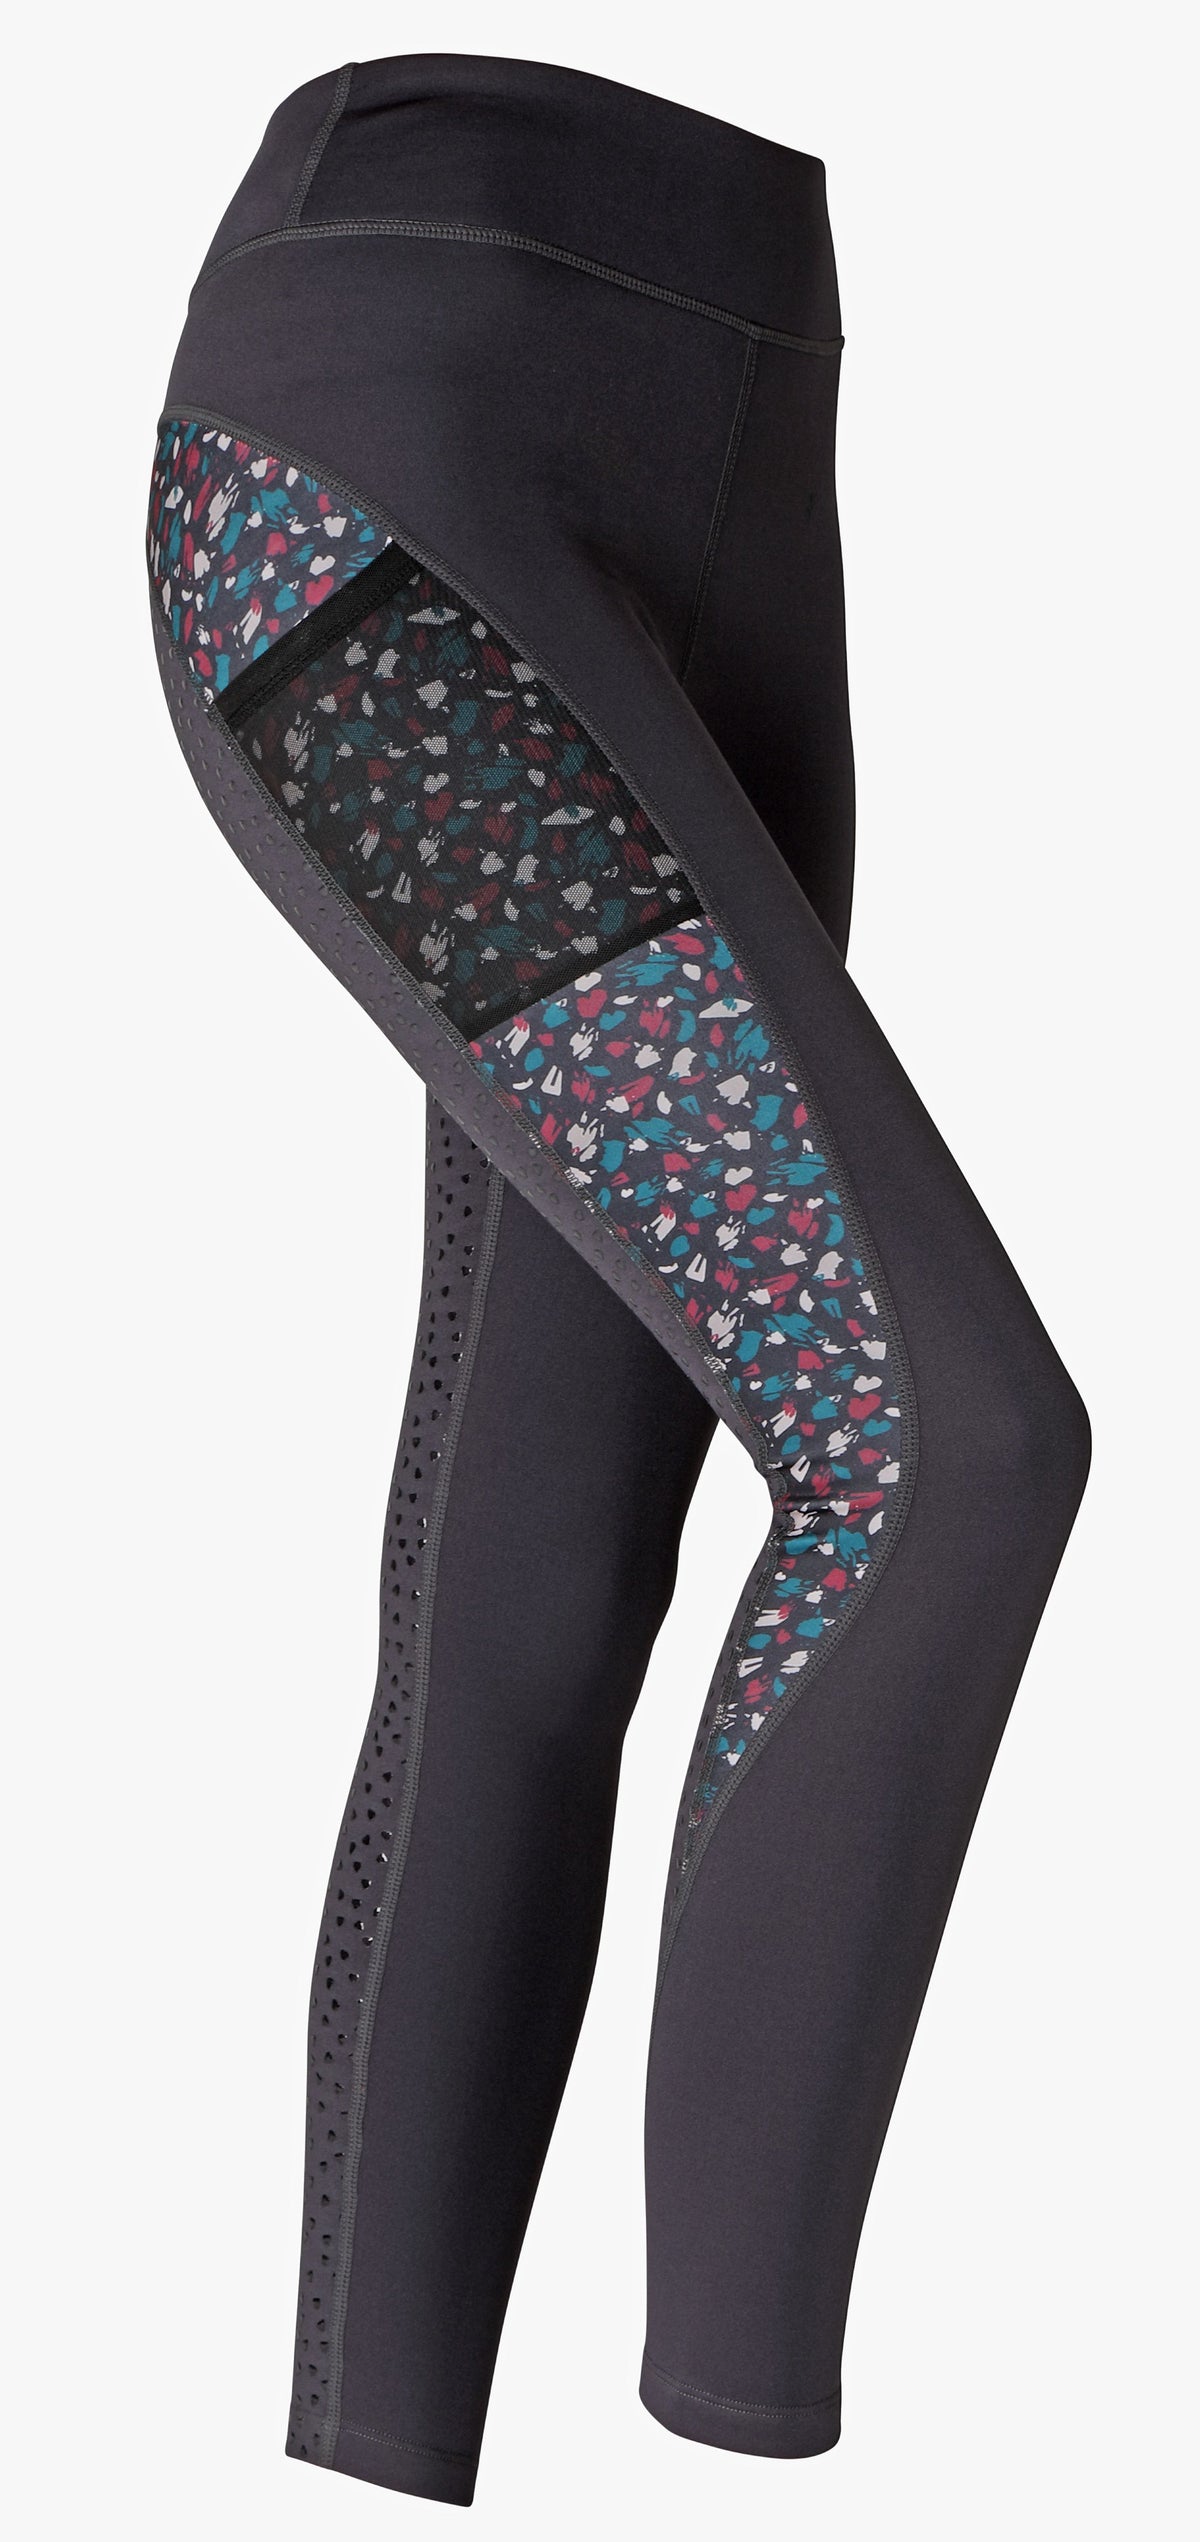 Shires Aubrion Equestrian Coombe Winter Riding Tights Ladies #8305